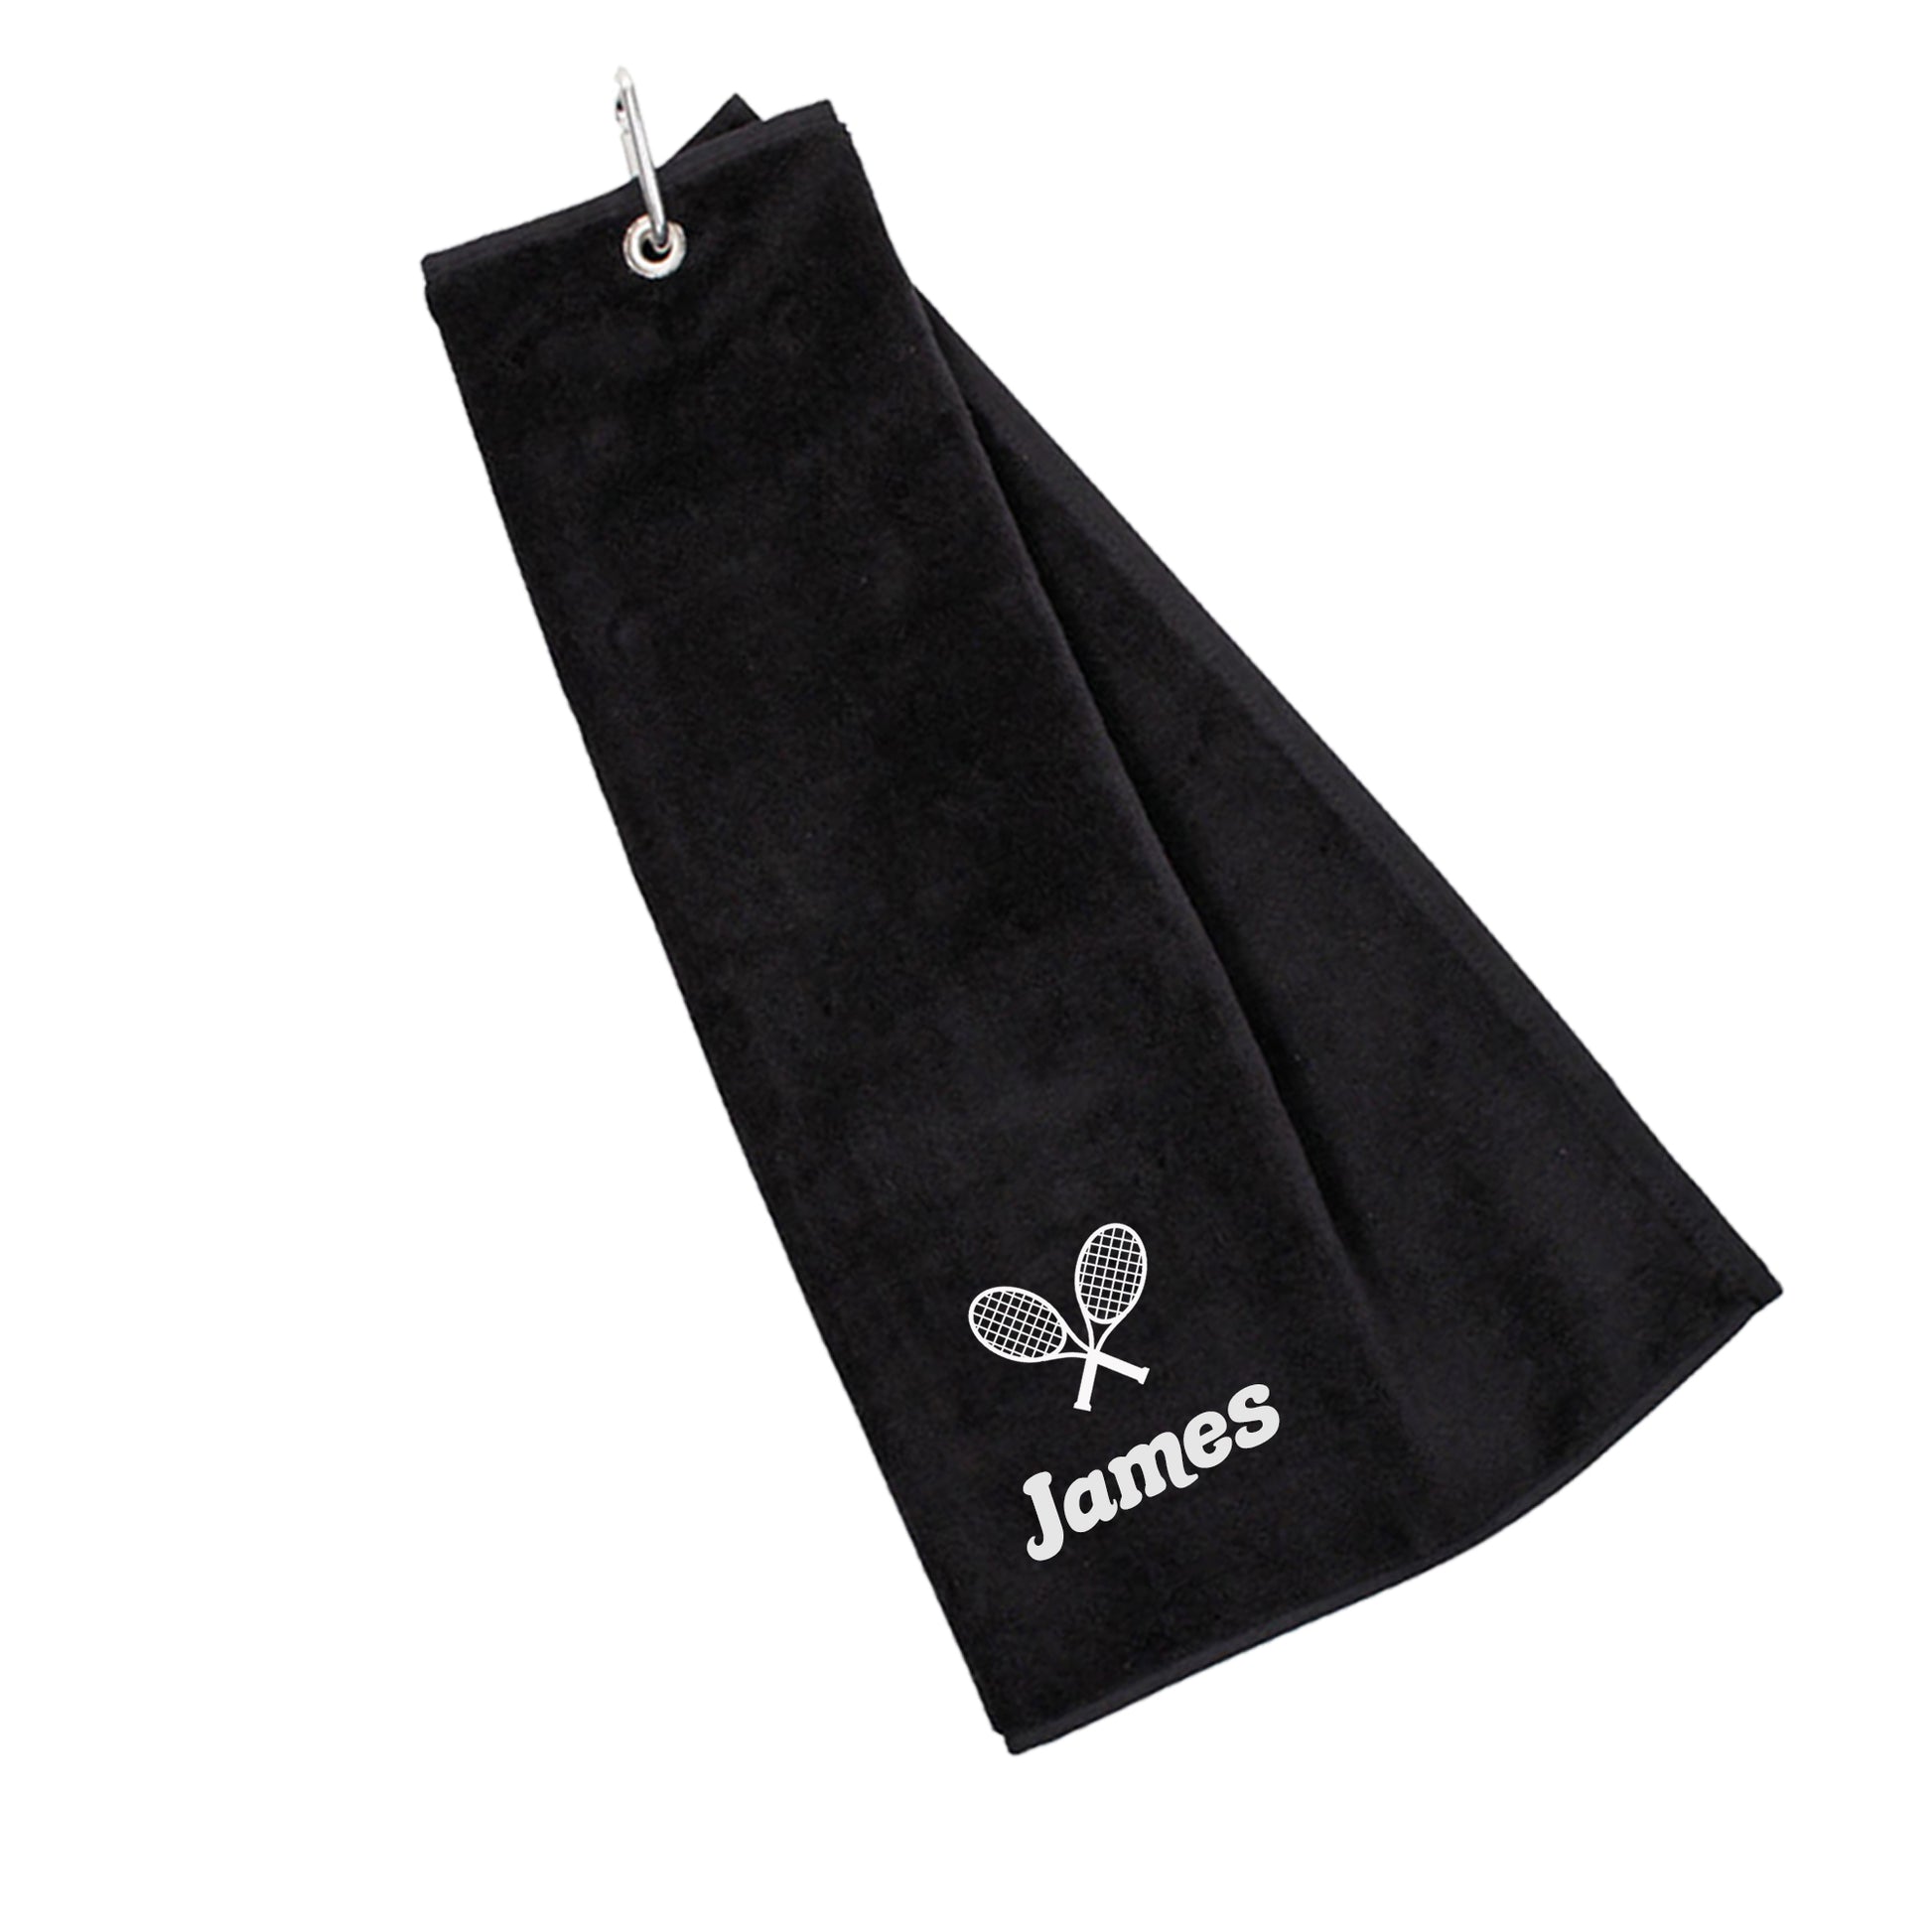 Personalised Embroidered Tri Fold TENNIS Towel Trifold with Carabiner Clip  - Always Looking Good - Black  